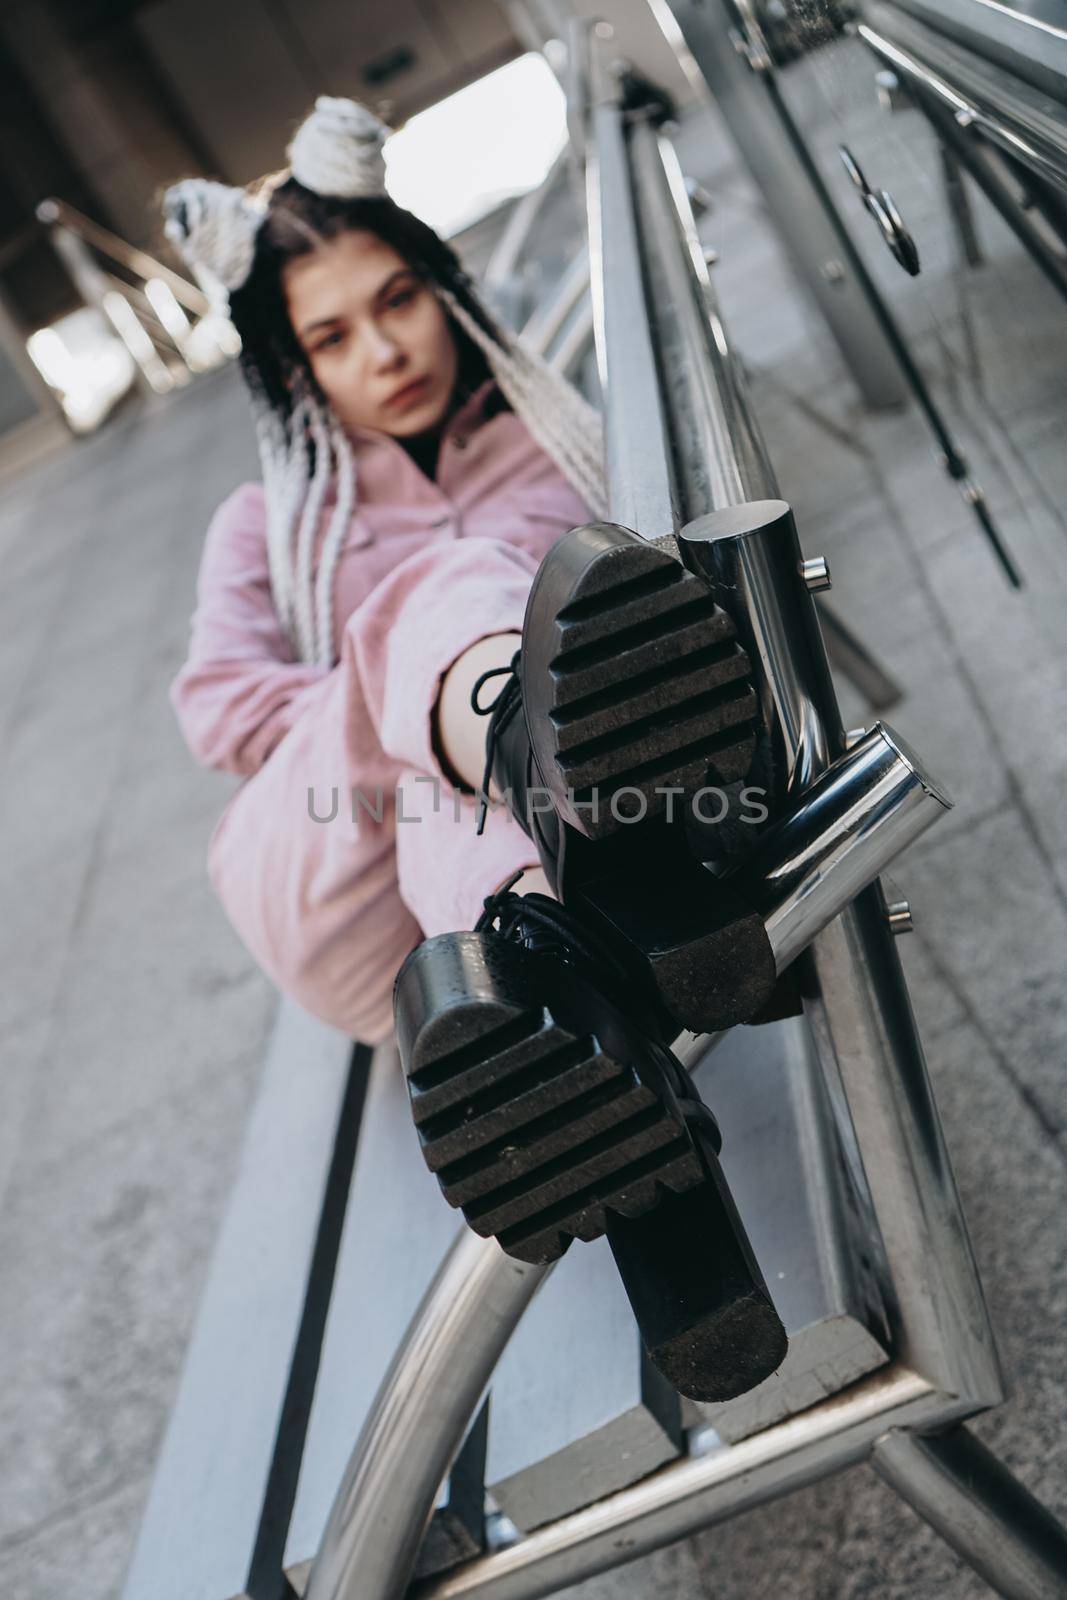 Young woman with futuristic looks. Girl with black and white dreadlocks or pigtails. Against the background of a futuristic building. Focus on shoes